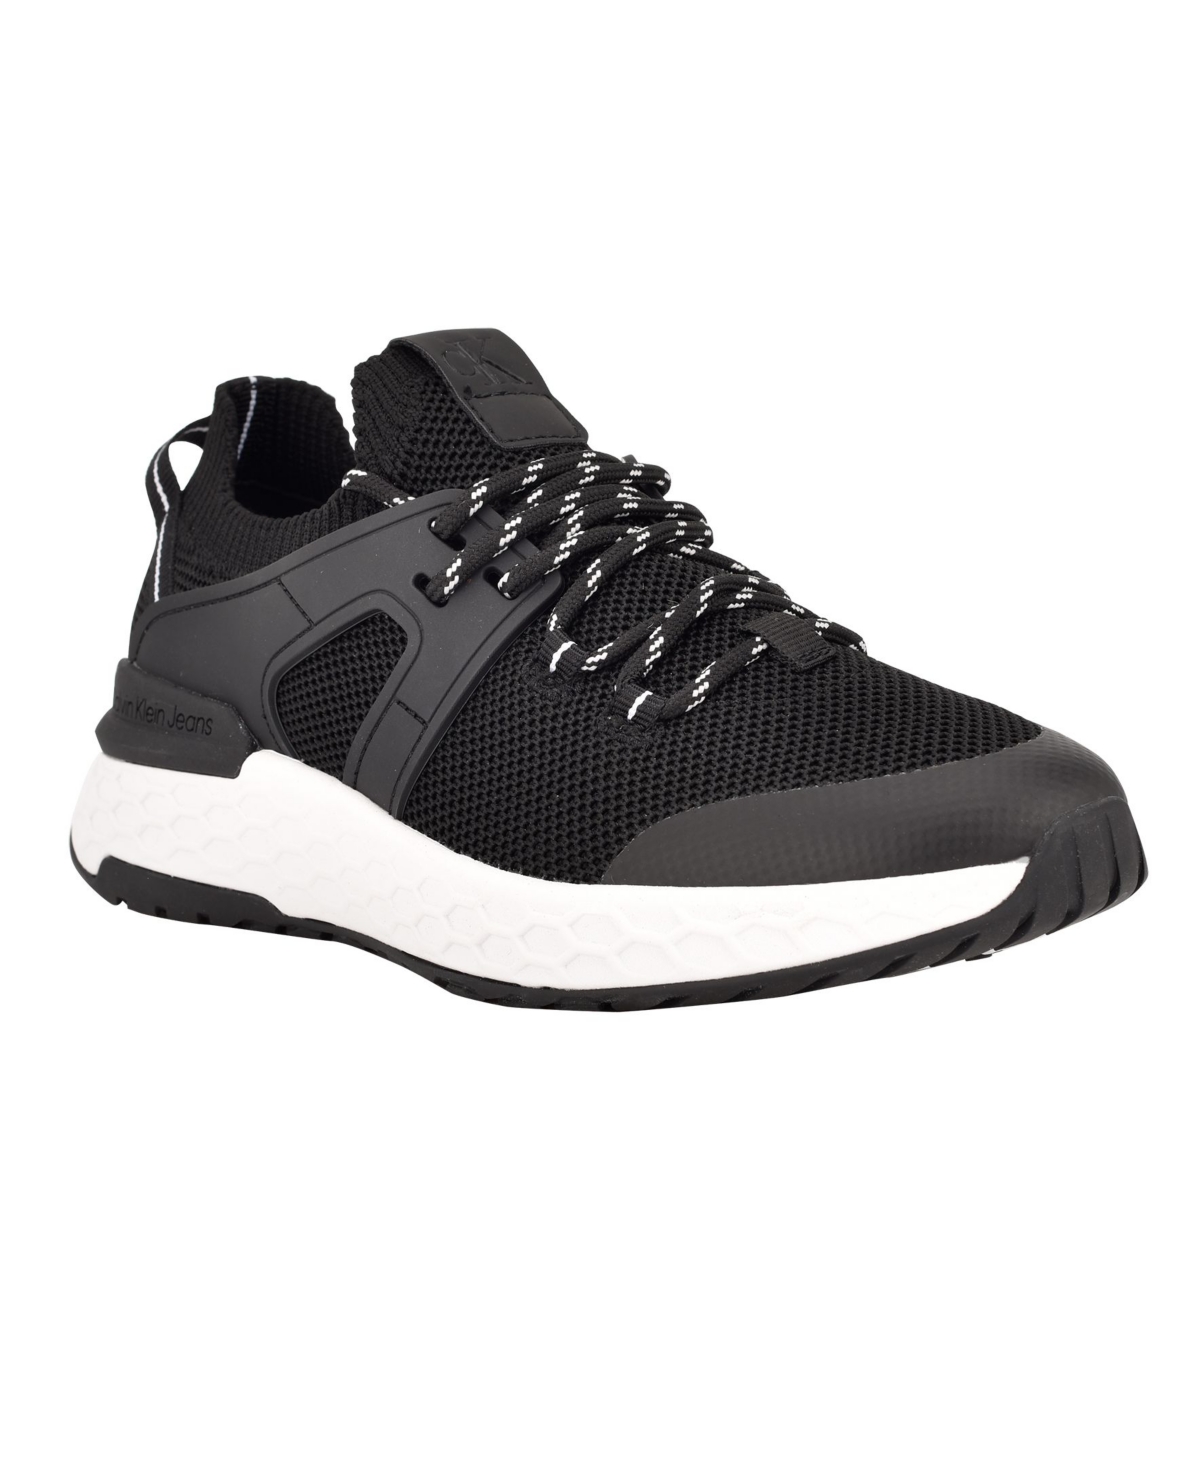 UPC 195972002364 product image for Calvin Klein Women's Aleah Lace-Up Sneakers Women's Shoes | upcitemdb.com